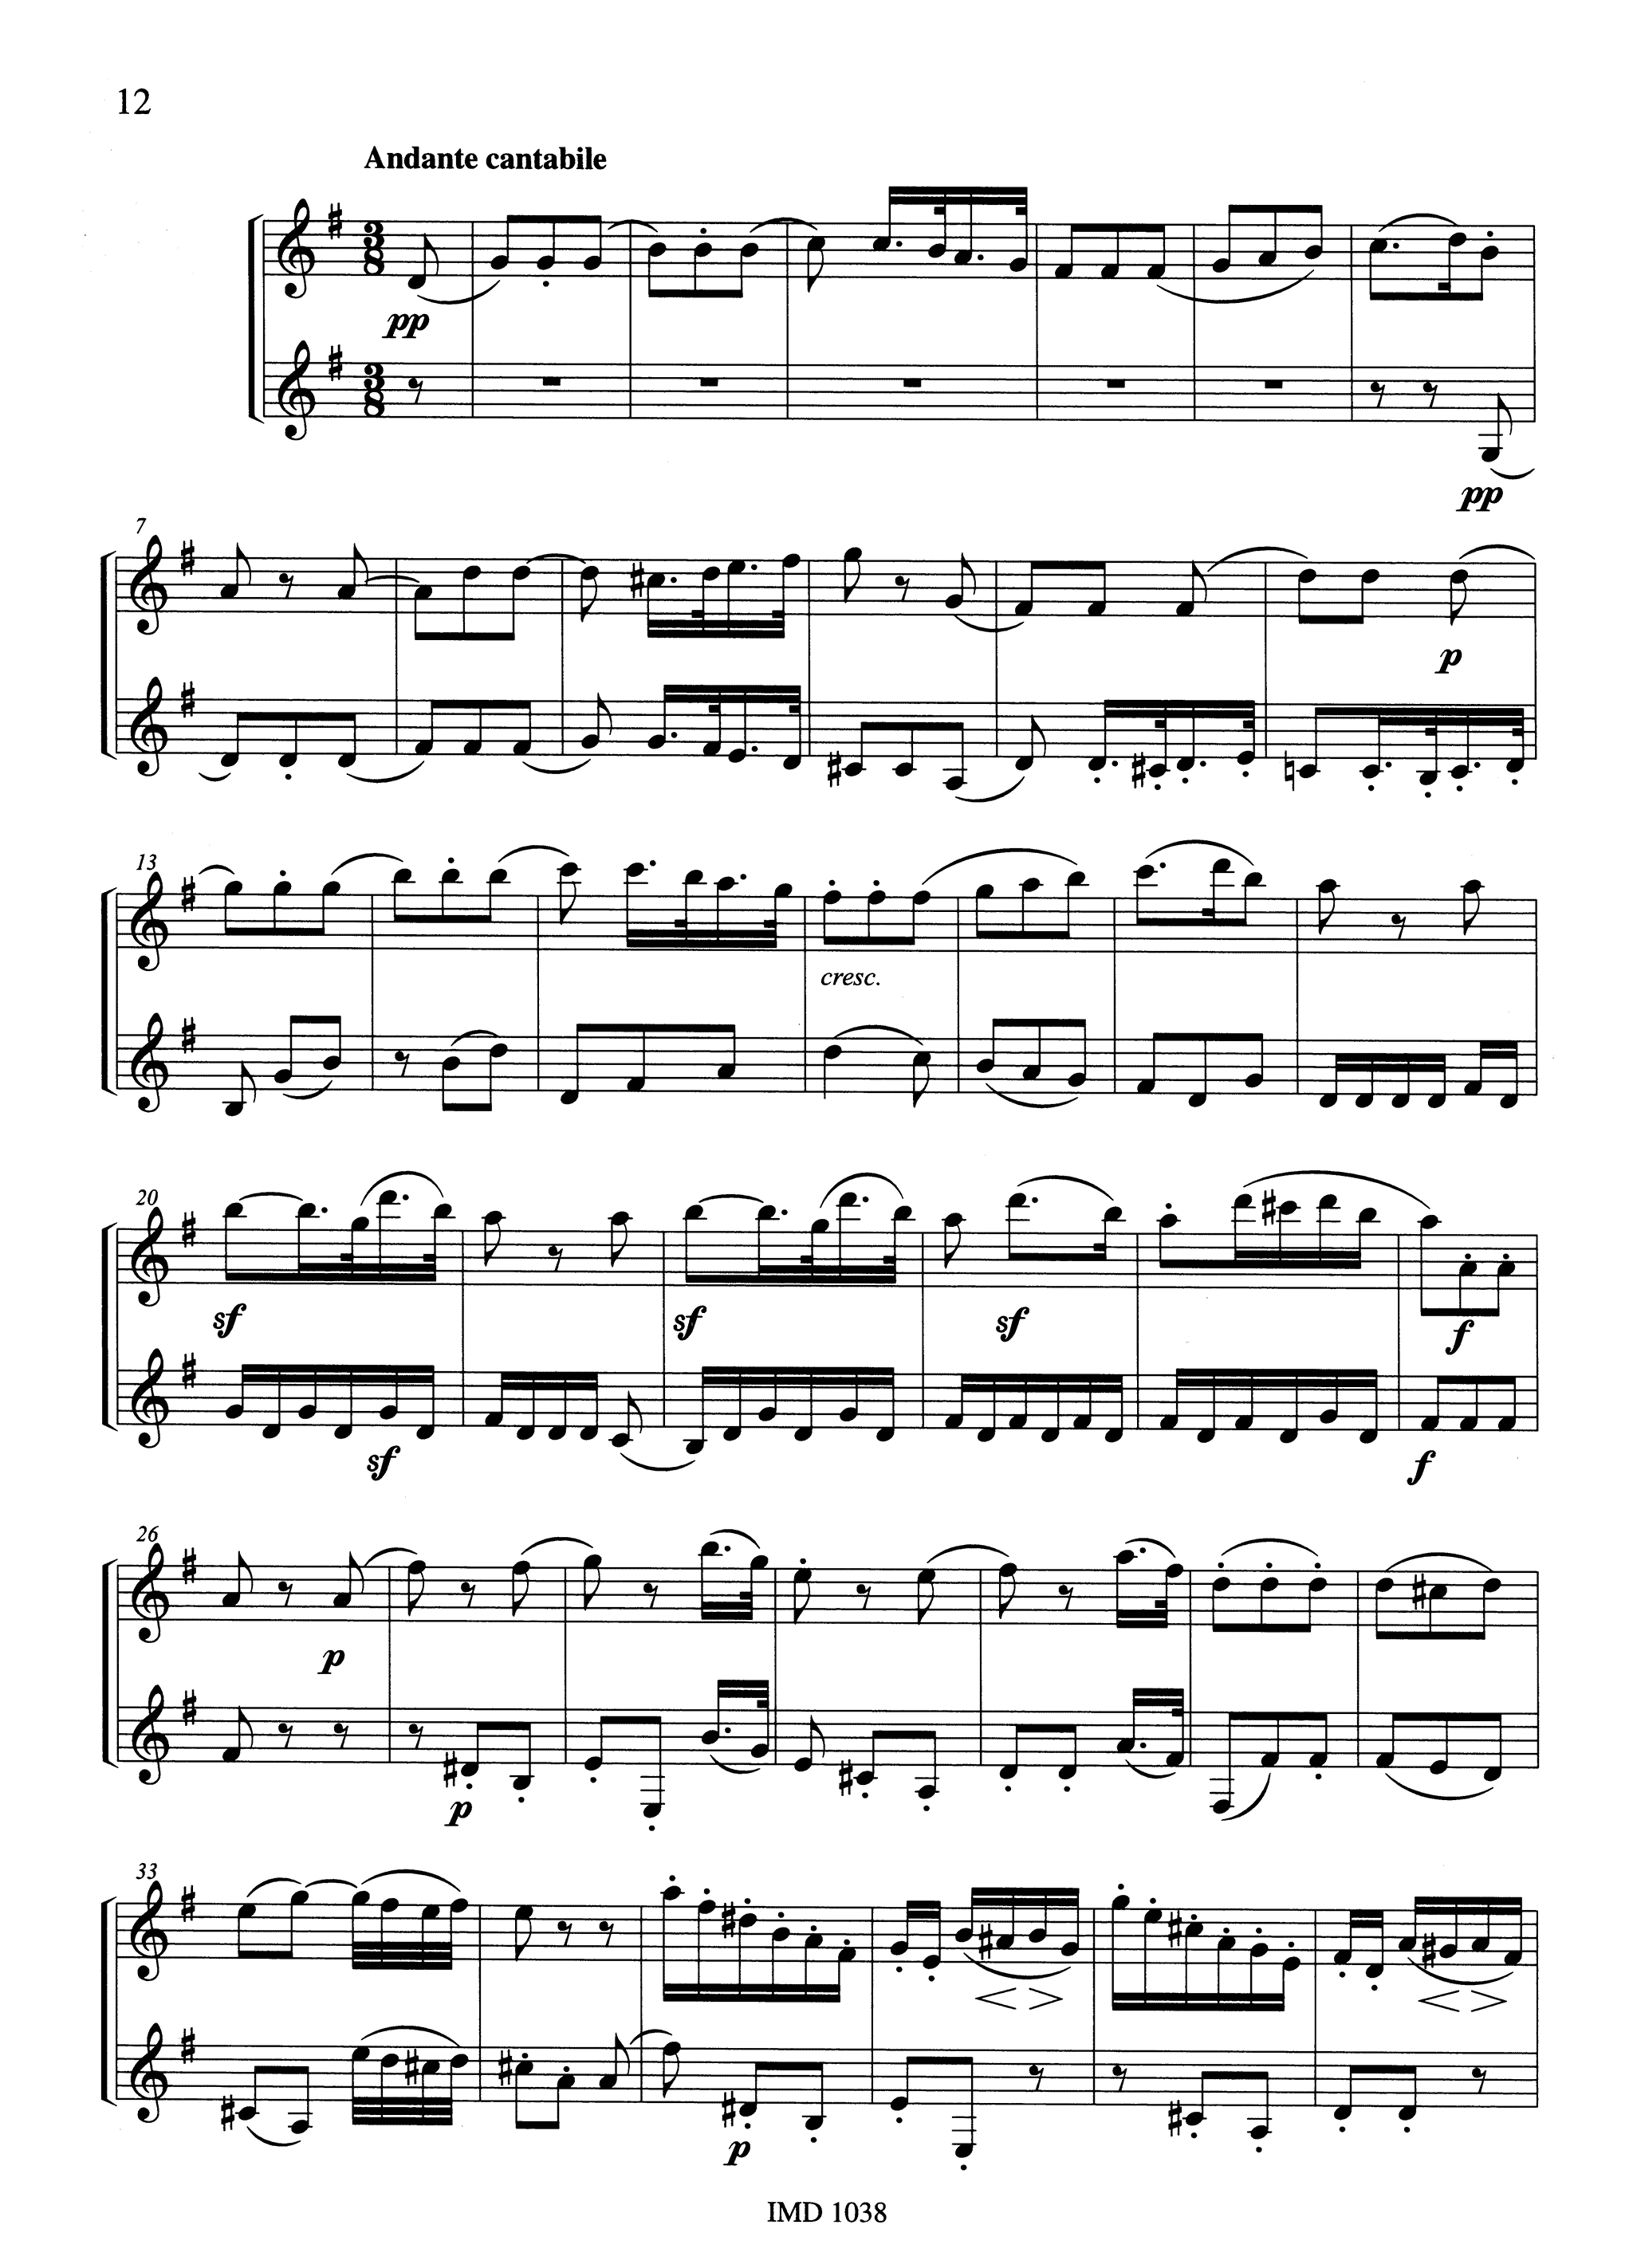 Symphony No. 1, Op. 21 for clarinet duet - Movement 2